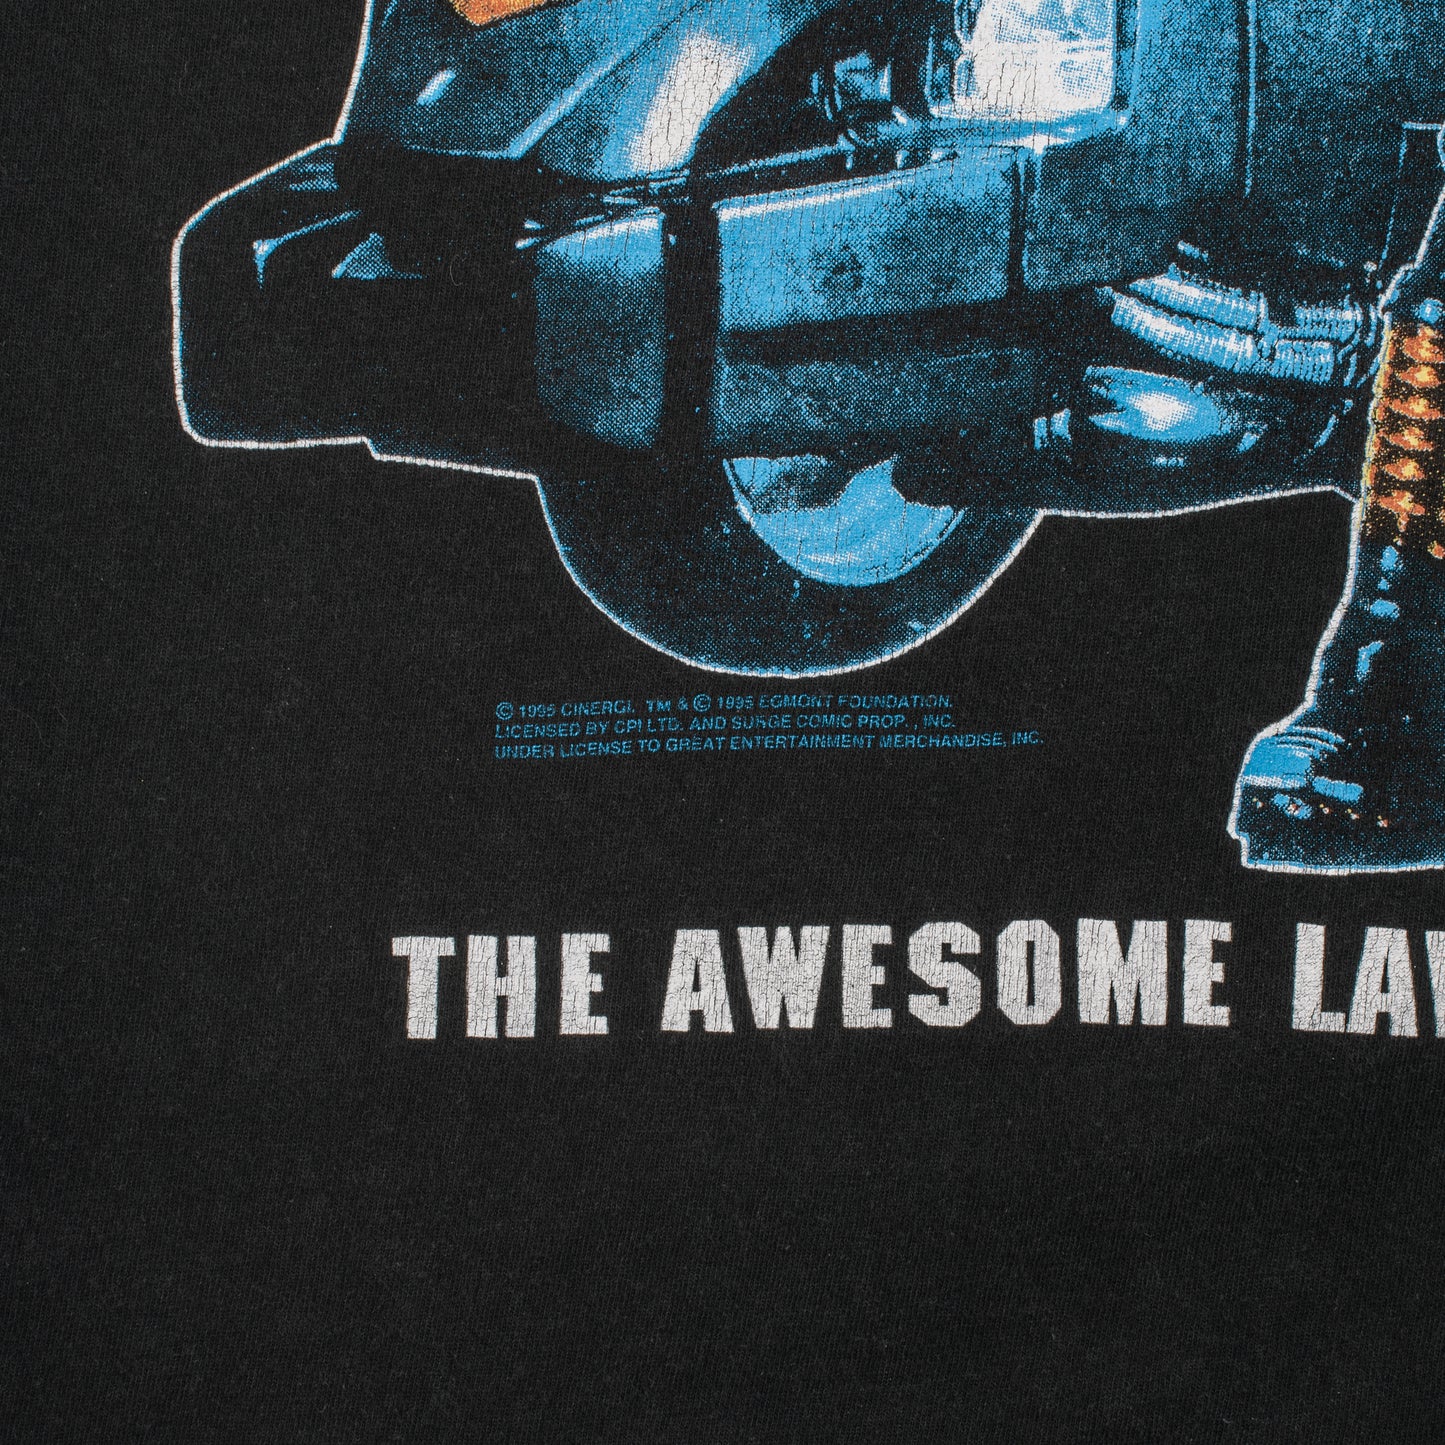 Vintage 1995 Judge Dredd The Awesome Lawmaster Video Game Promo T-Shirt